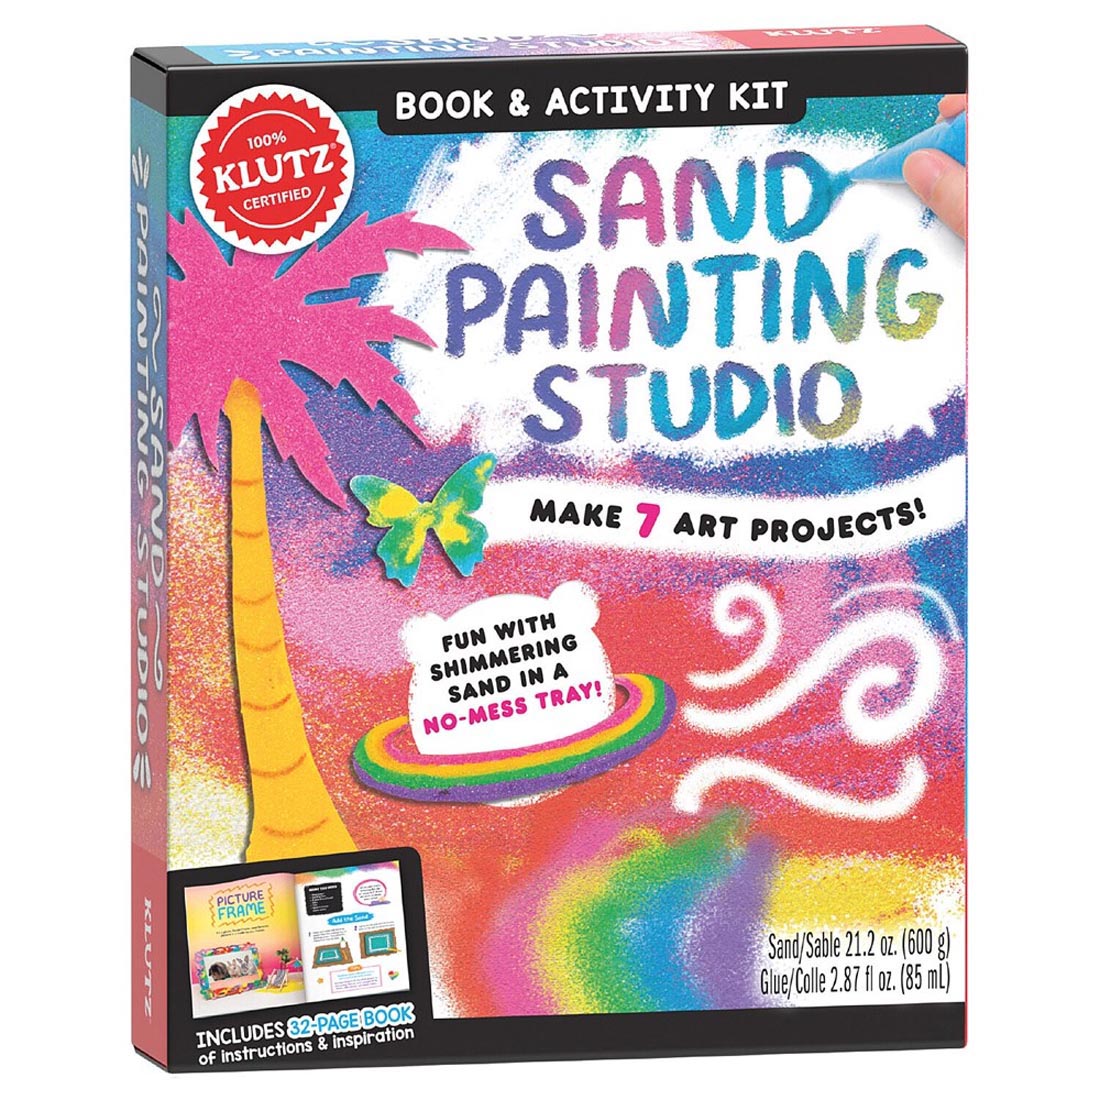 Sand Painting Studio Book & Activity Kit By Klutz Press